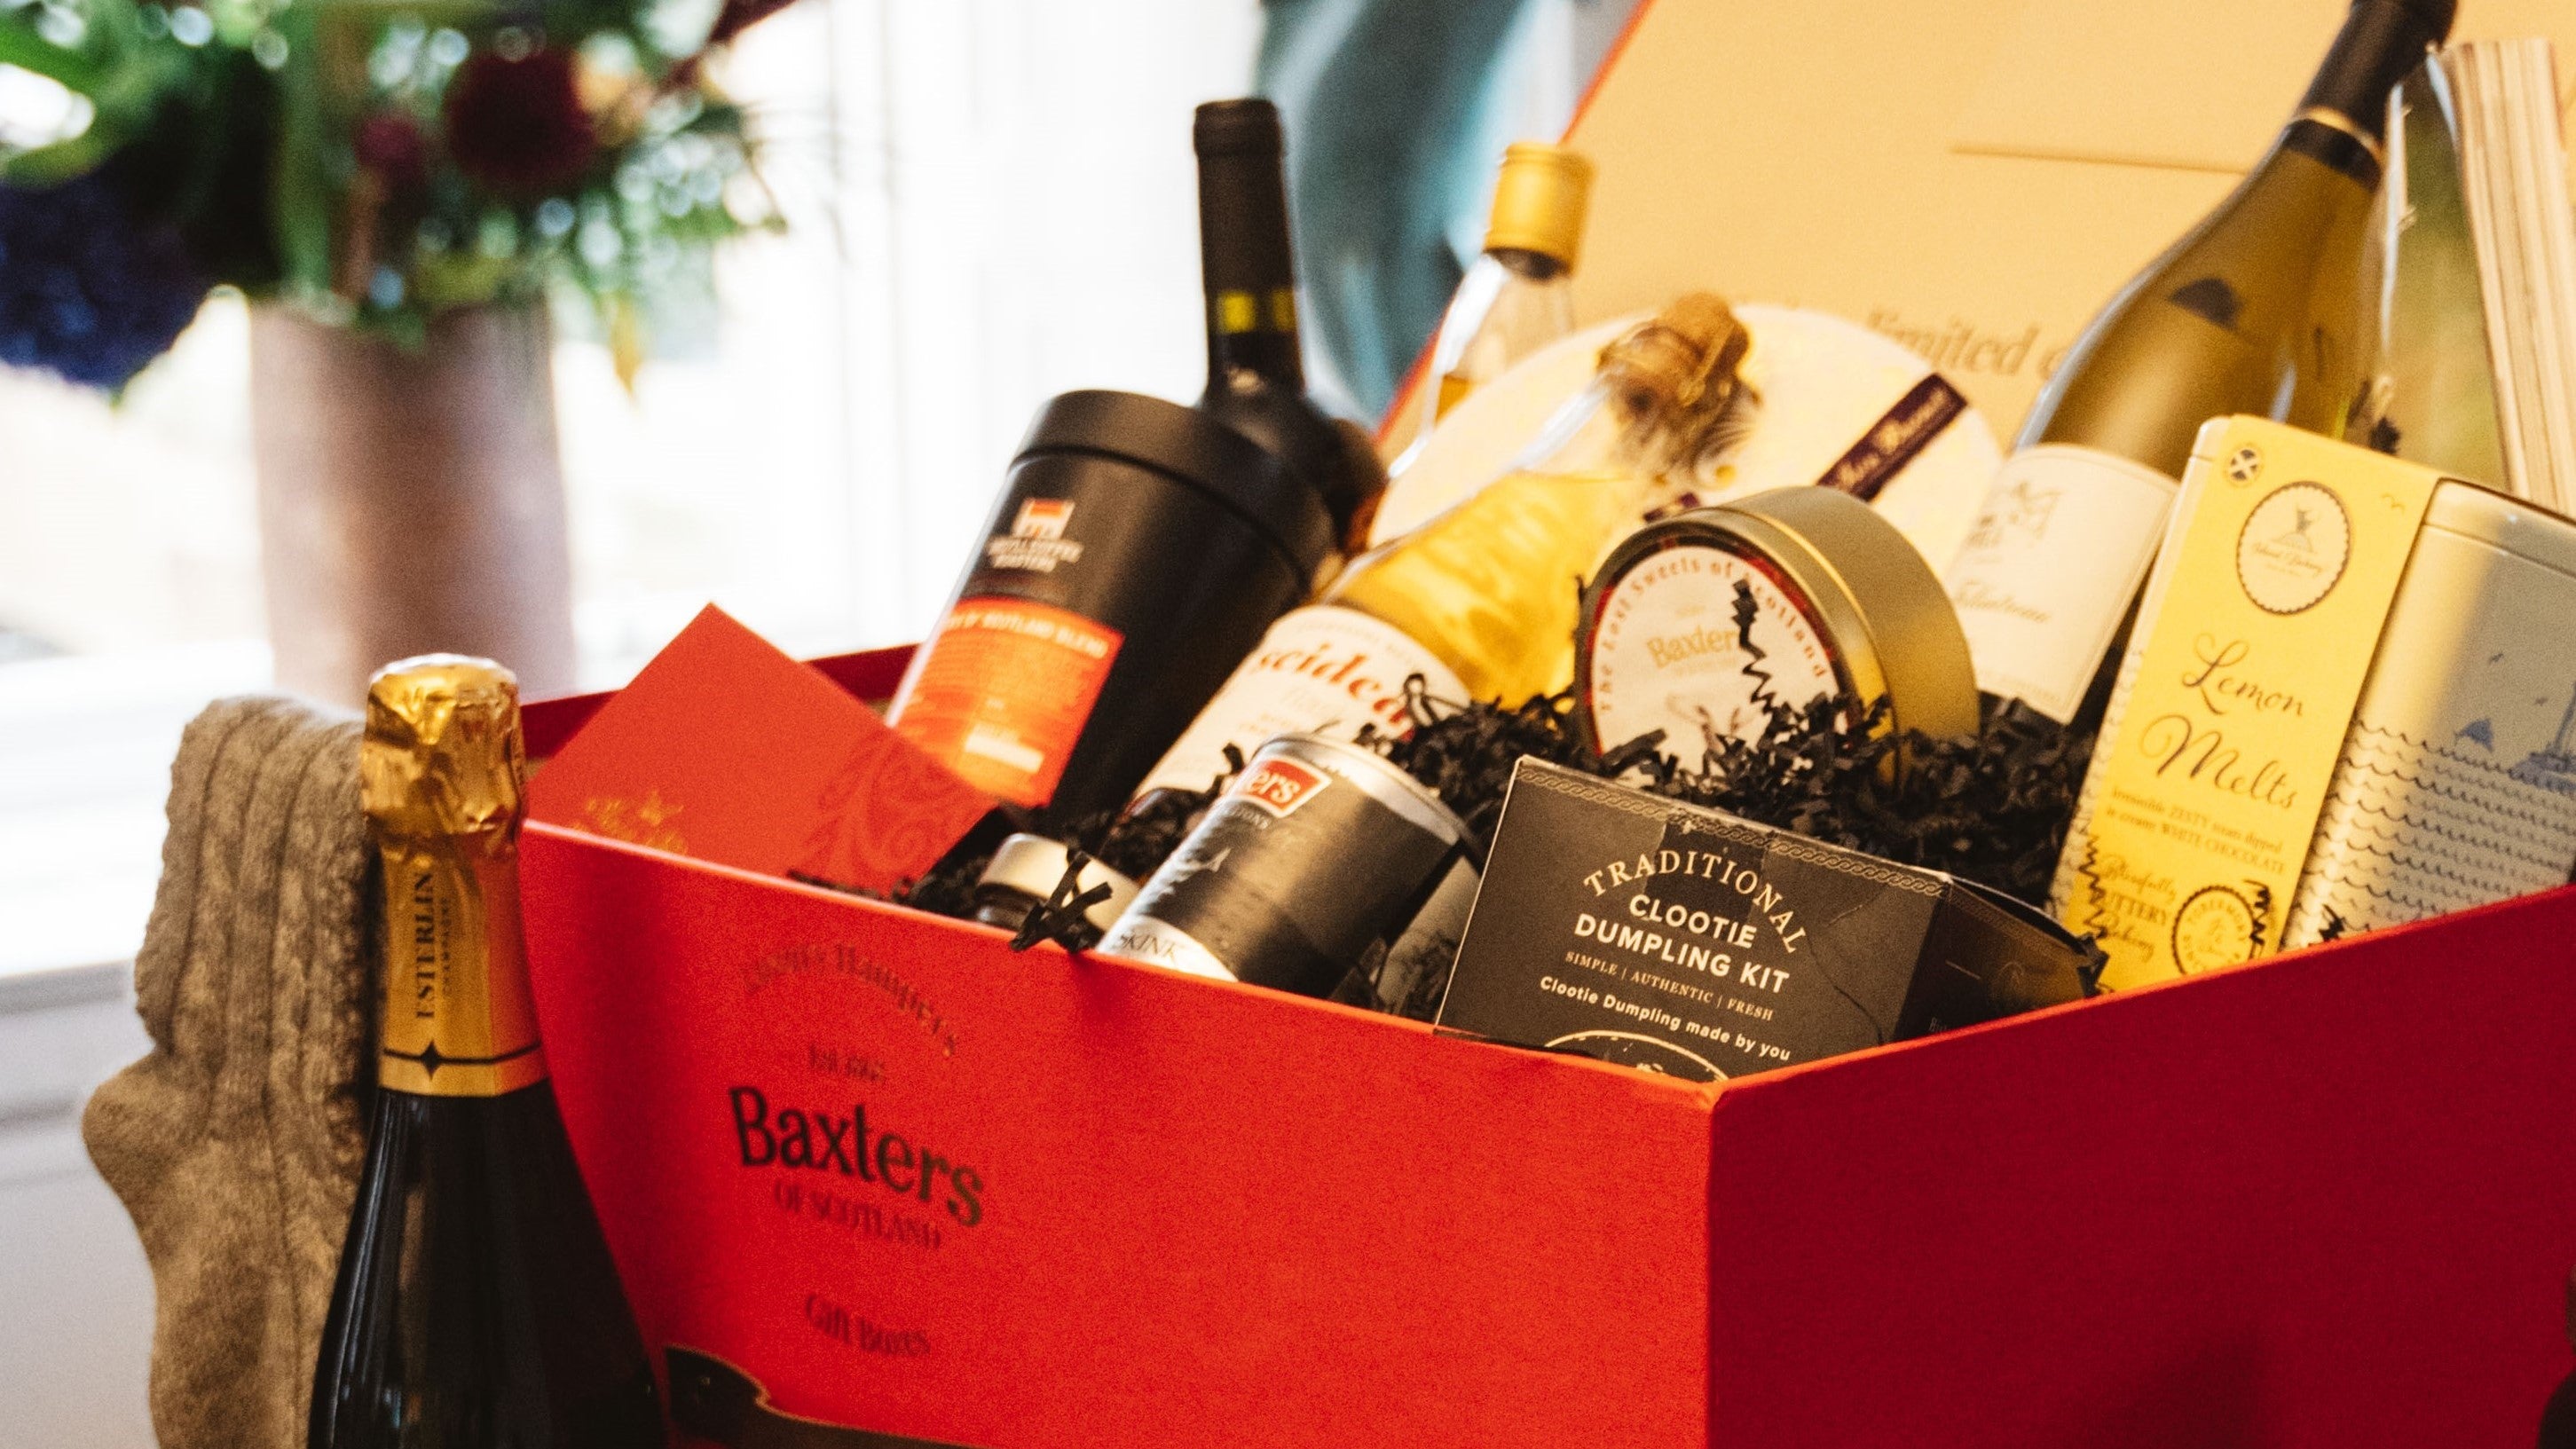 Baxters of Scotland's Luxury Hampers at their special launch event.